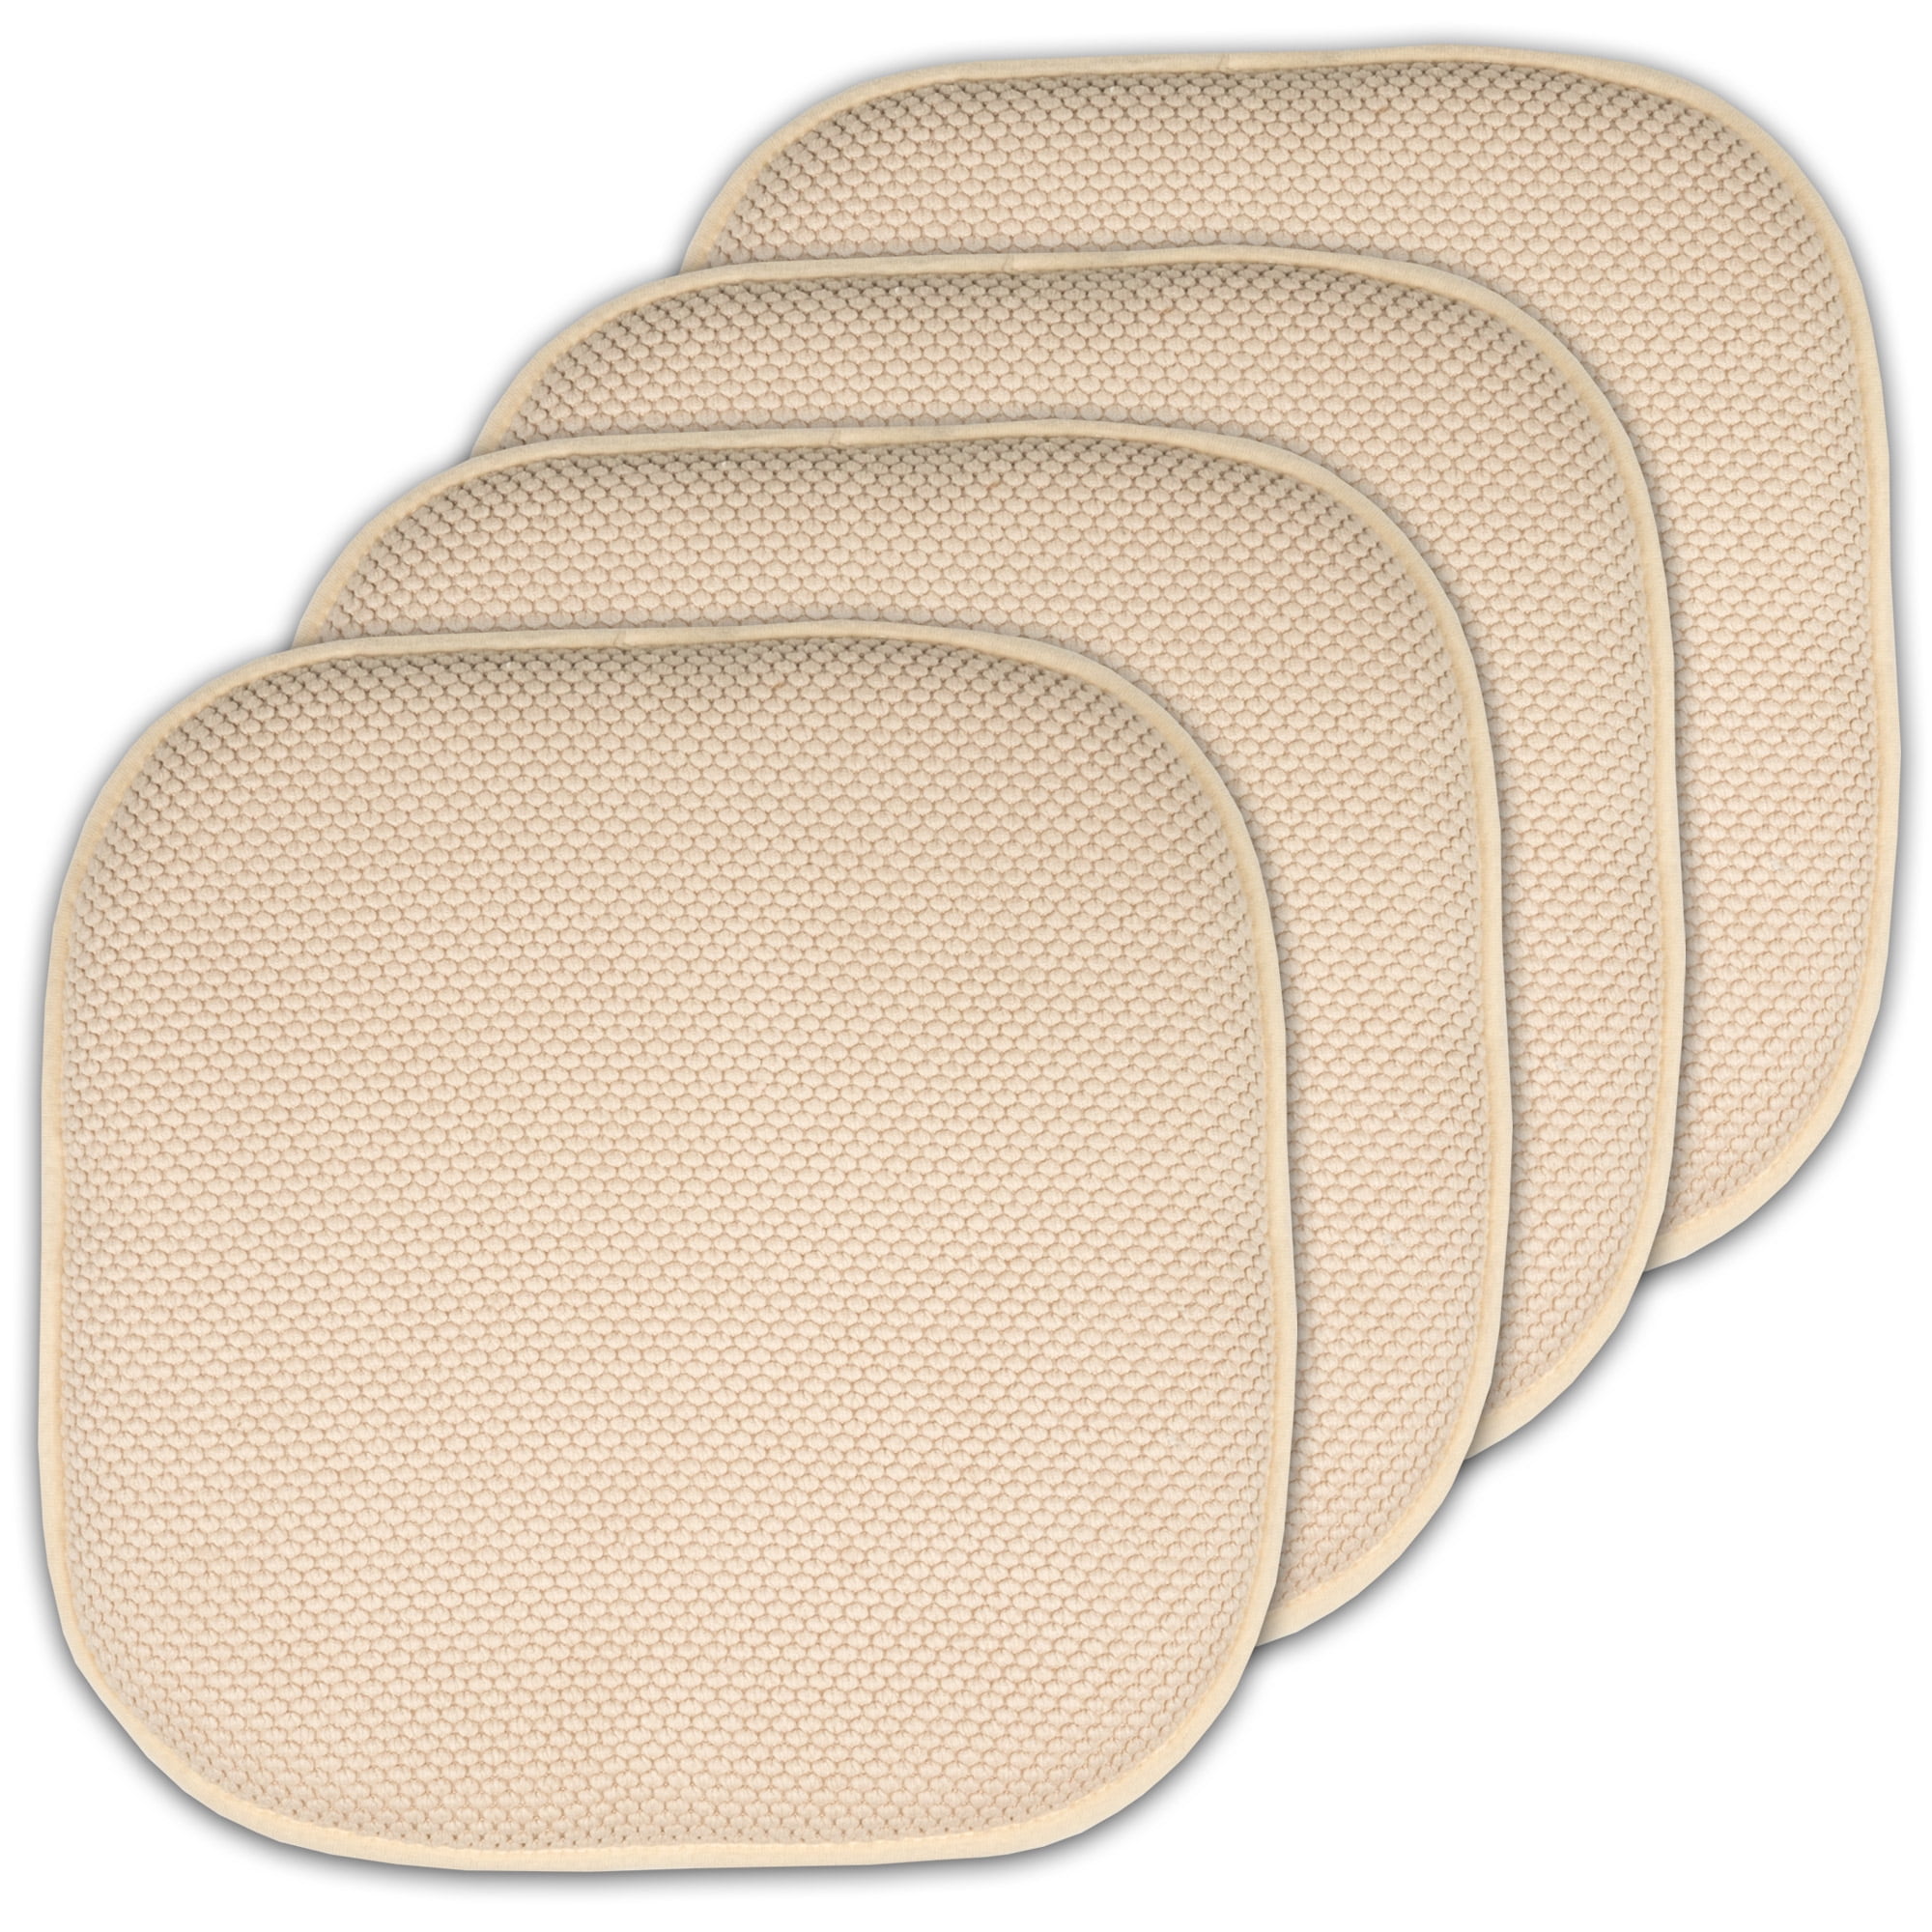 Alexis Cream/Brown Sweet Home Collection Chair Cushion Memory Foam Pads Honeycomb Pattern Slip Non Skid Rubber Back Rounded Square 16 x 16 Seat Cover 4 Pack 